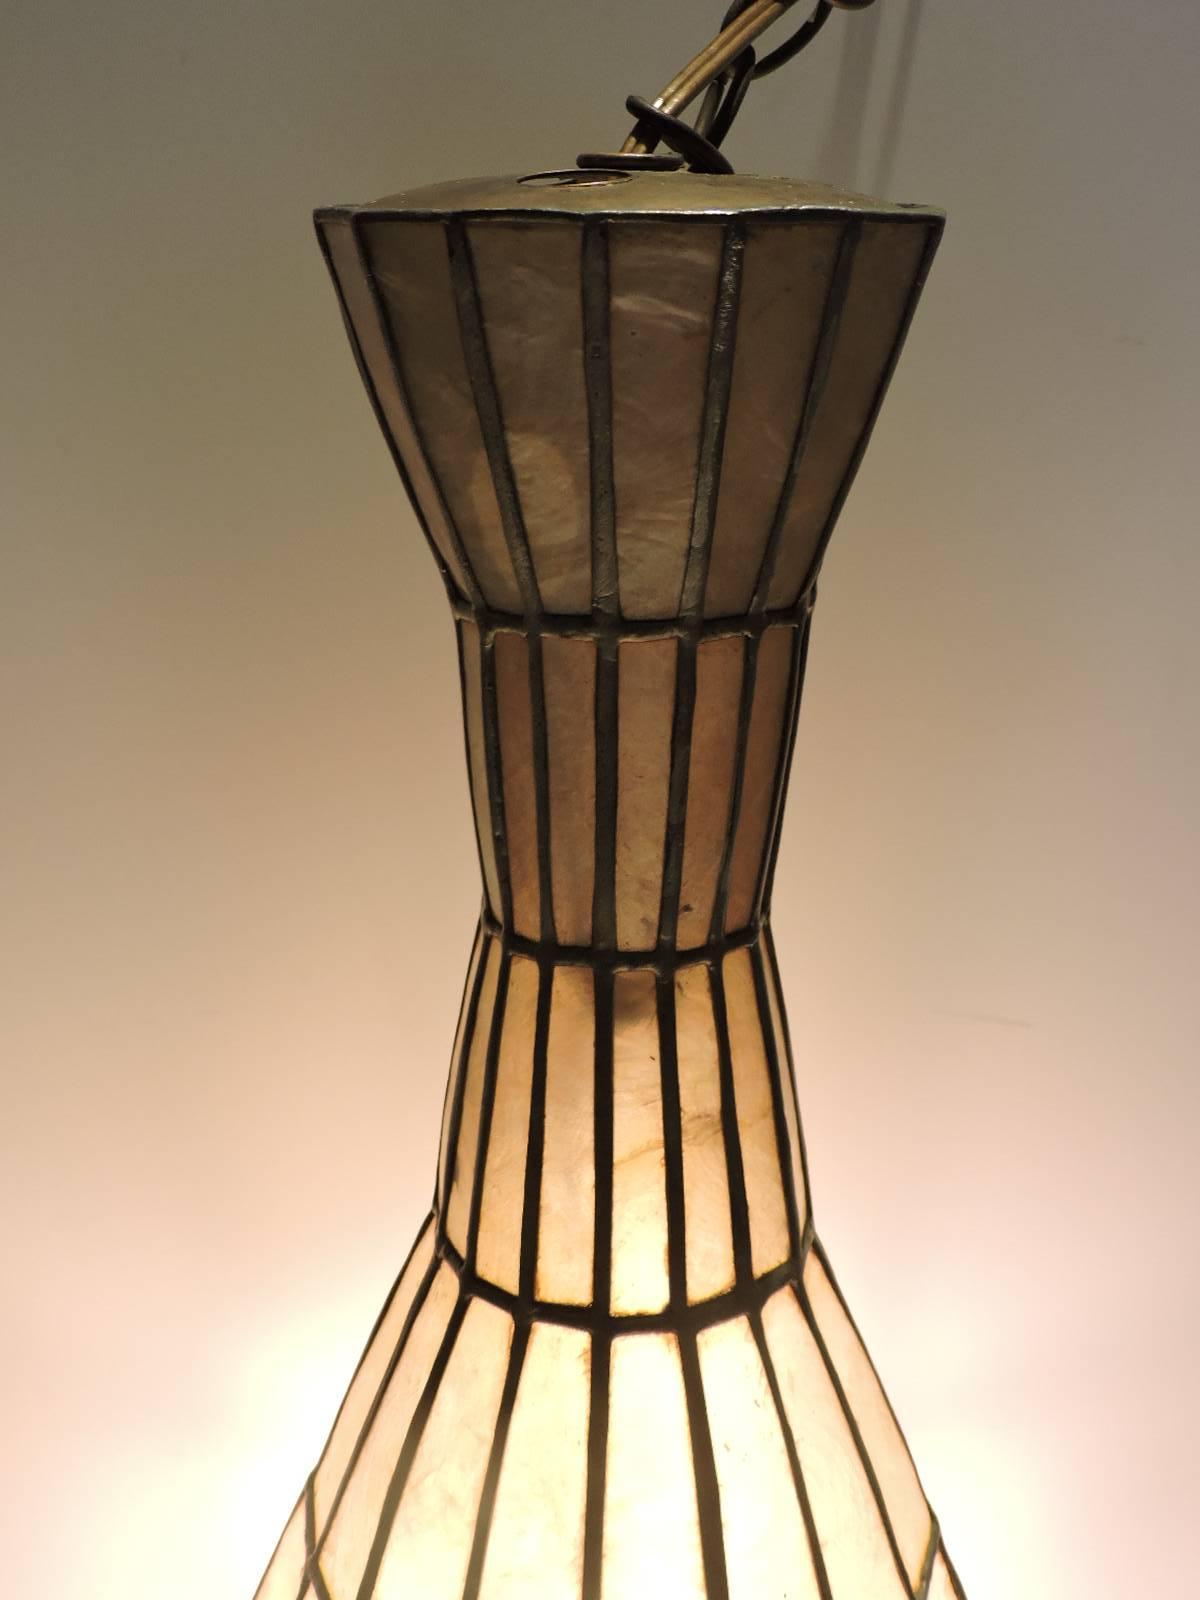 Large Elongated Vase Form Capiz Shell Pendant Chandelier In Good Condition For Sale In Rochester, NY